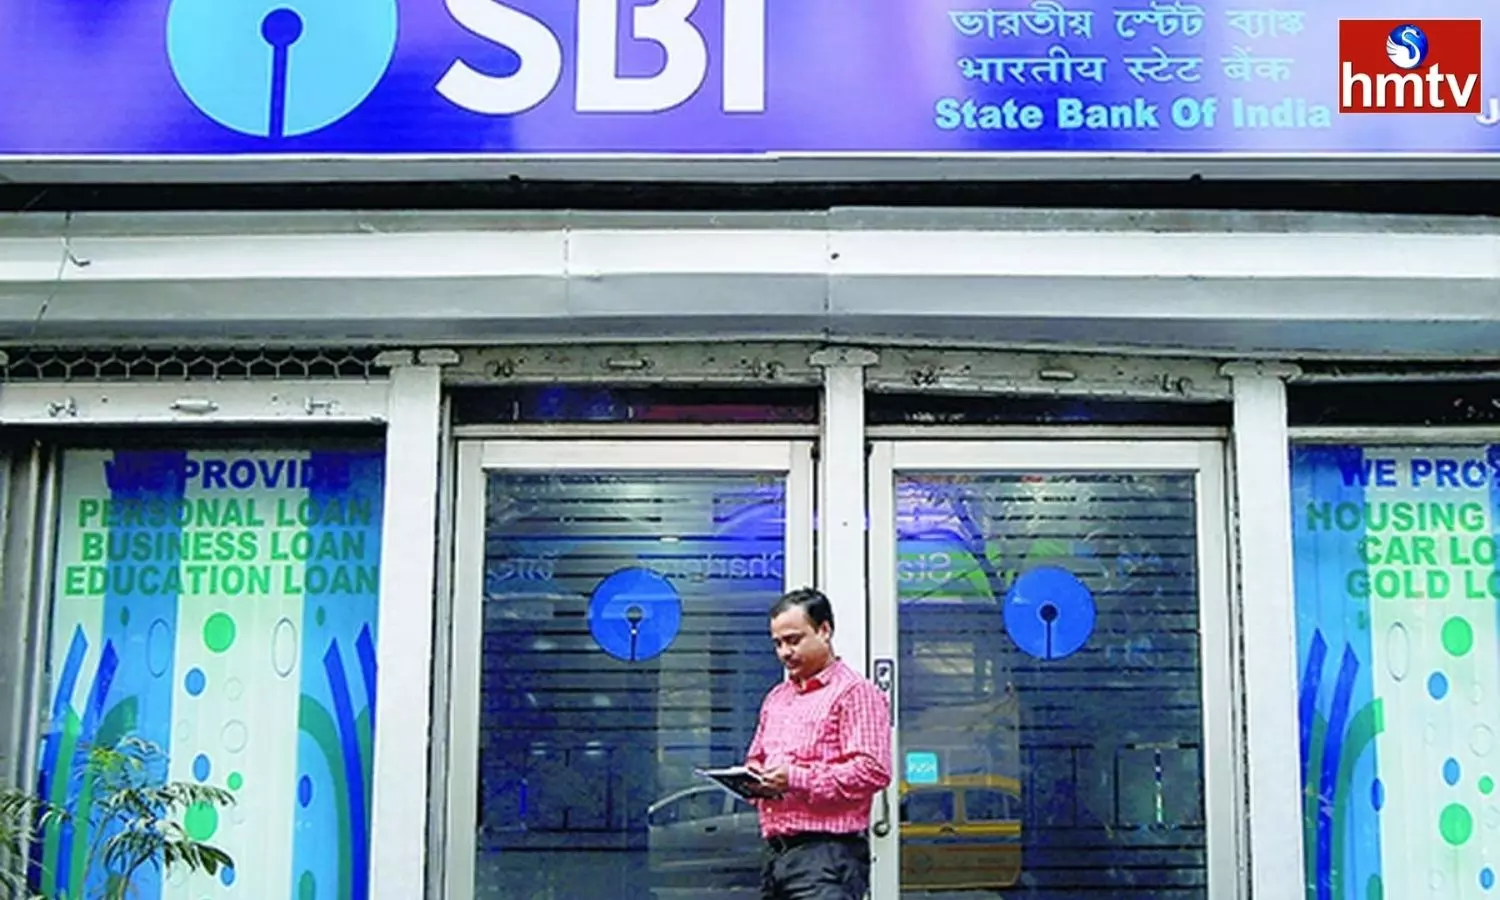 PPF account SBI offers public provident fund Account open in online